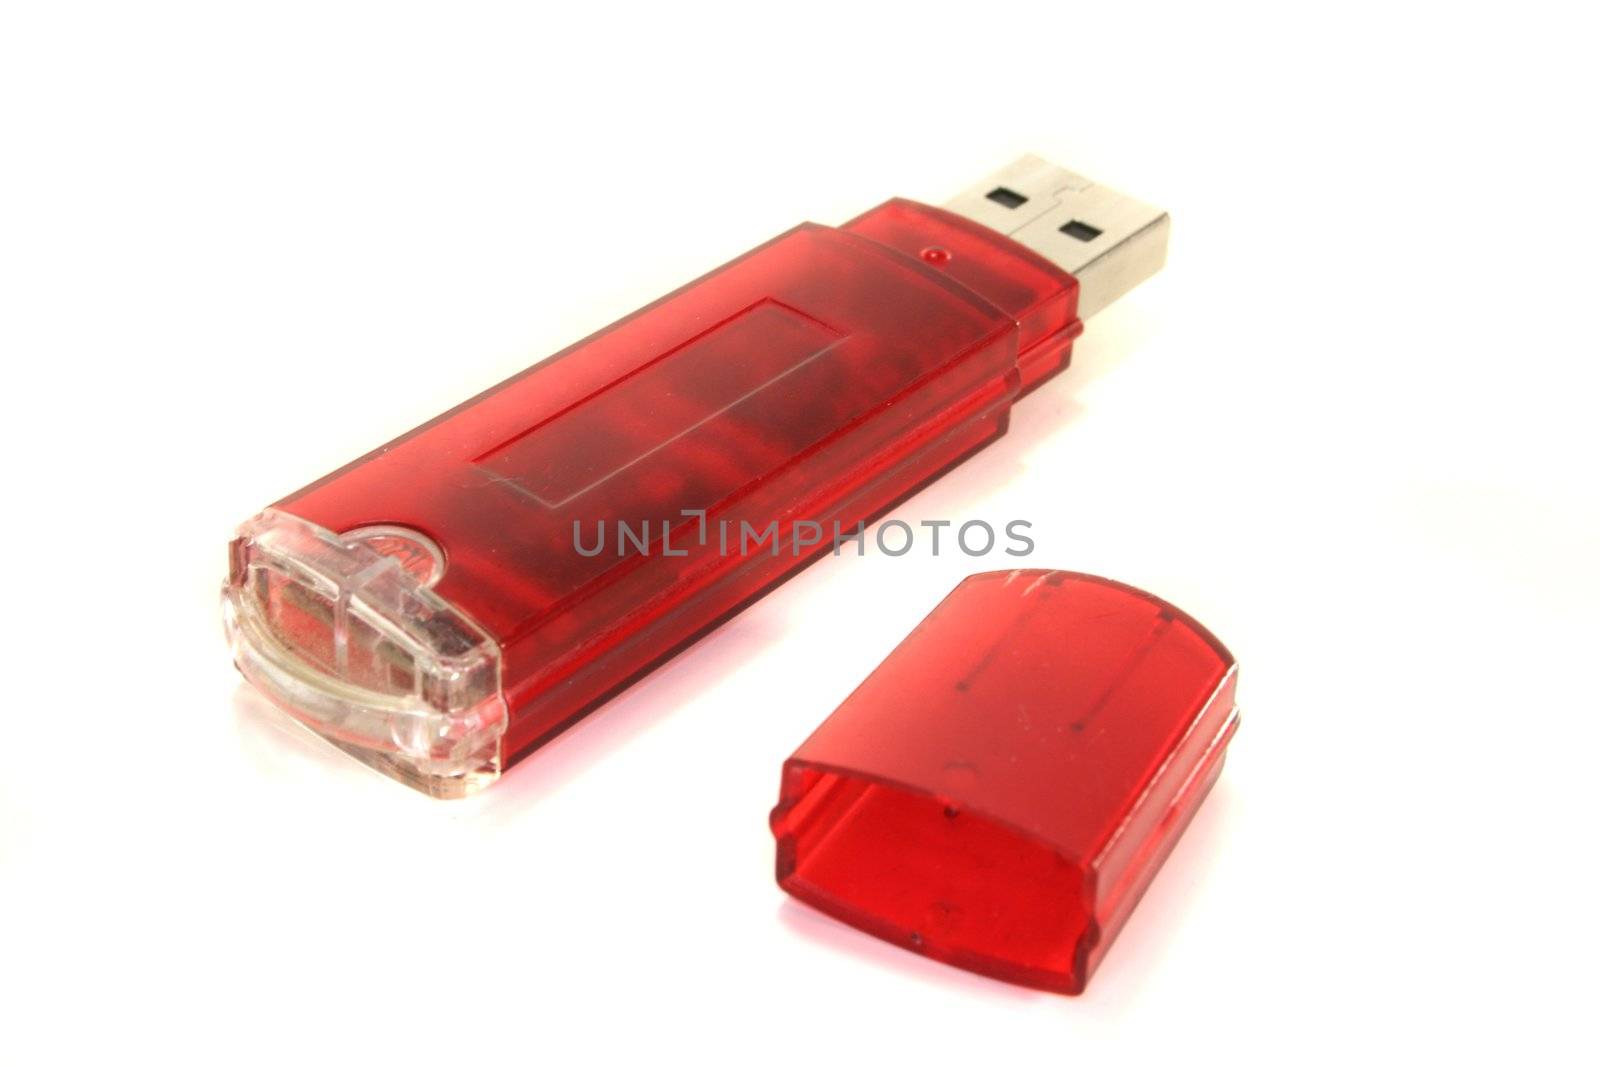 open red USB stick on a white background